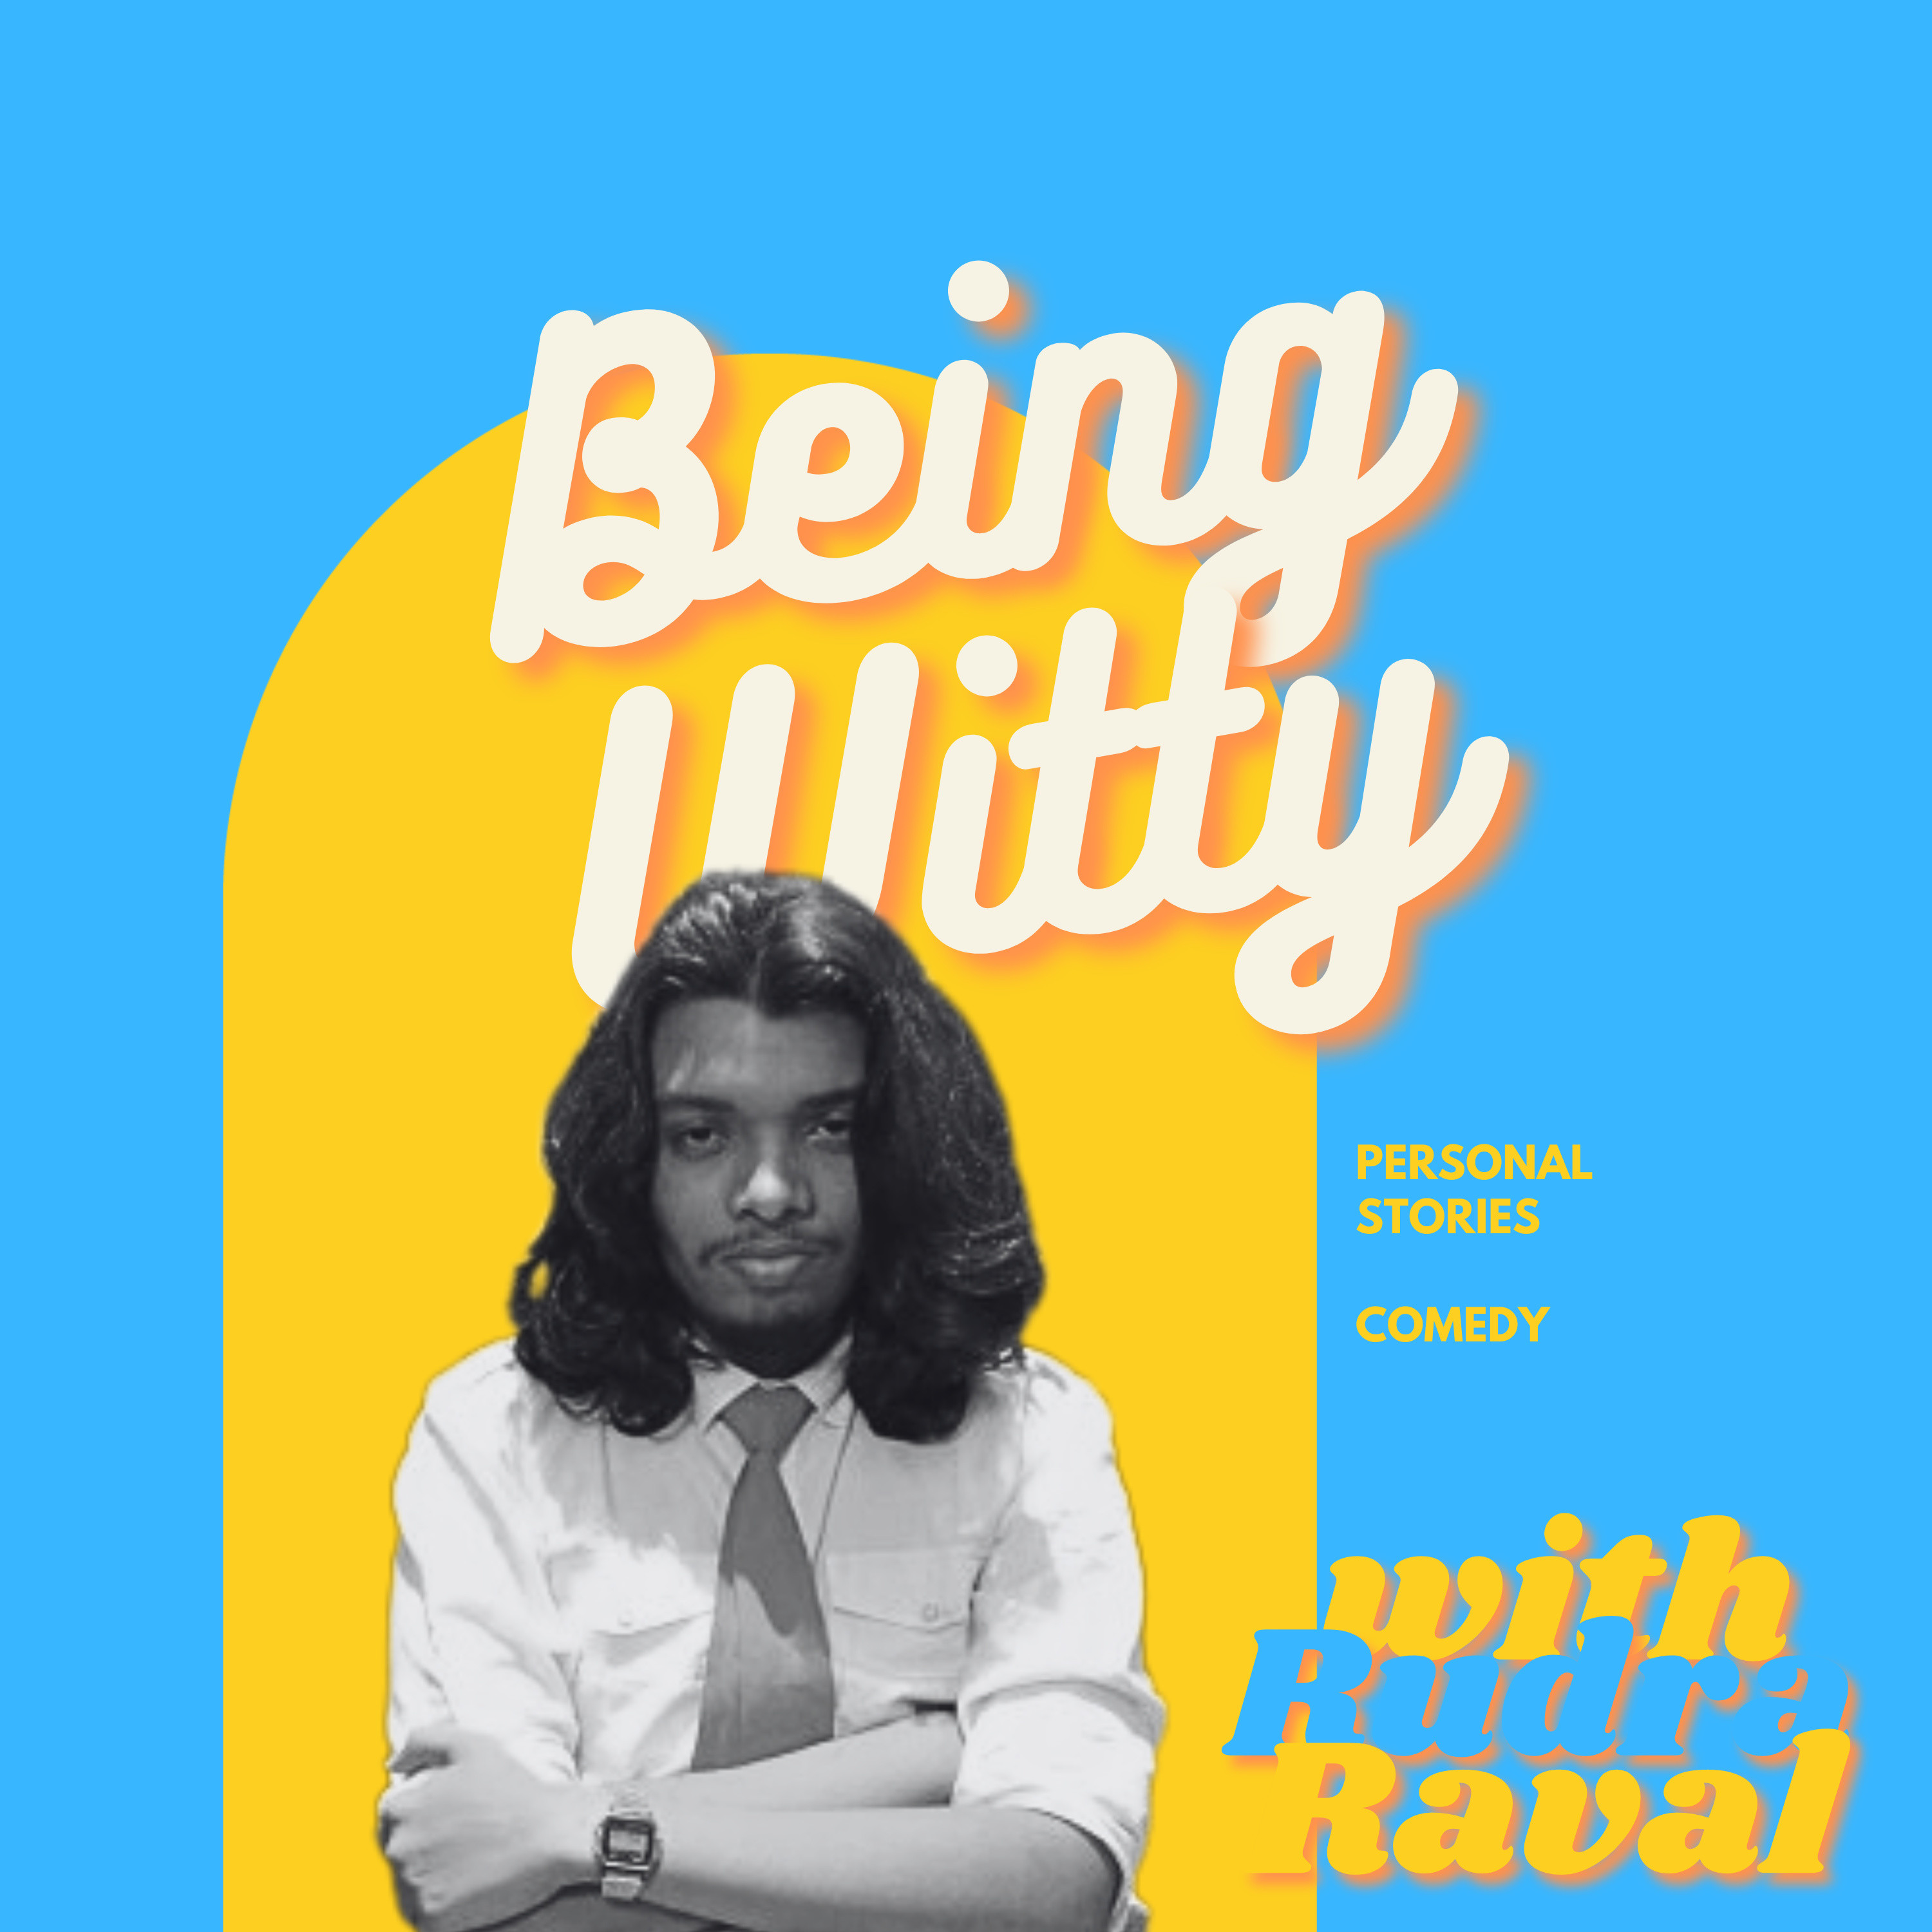 Being Witty with Rudra Raval